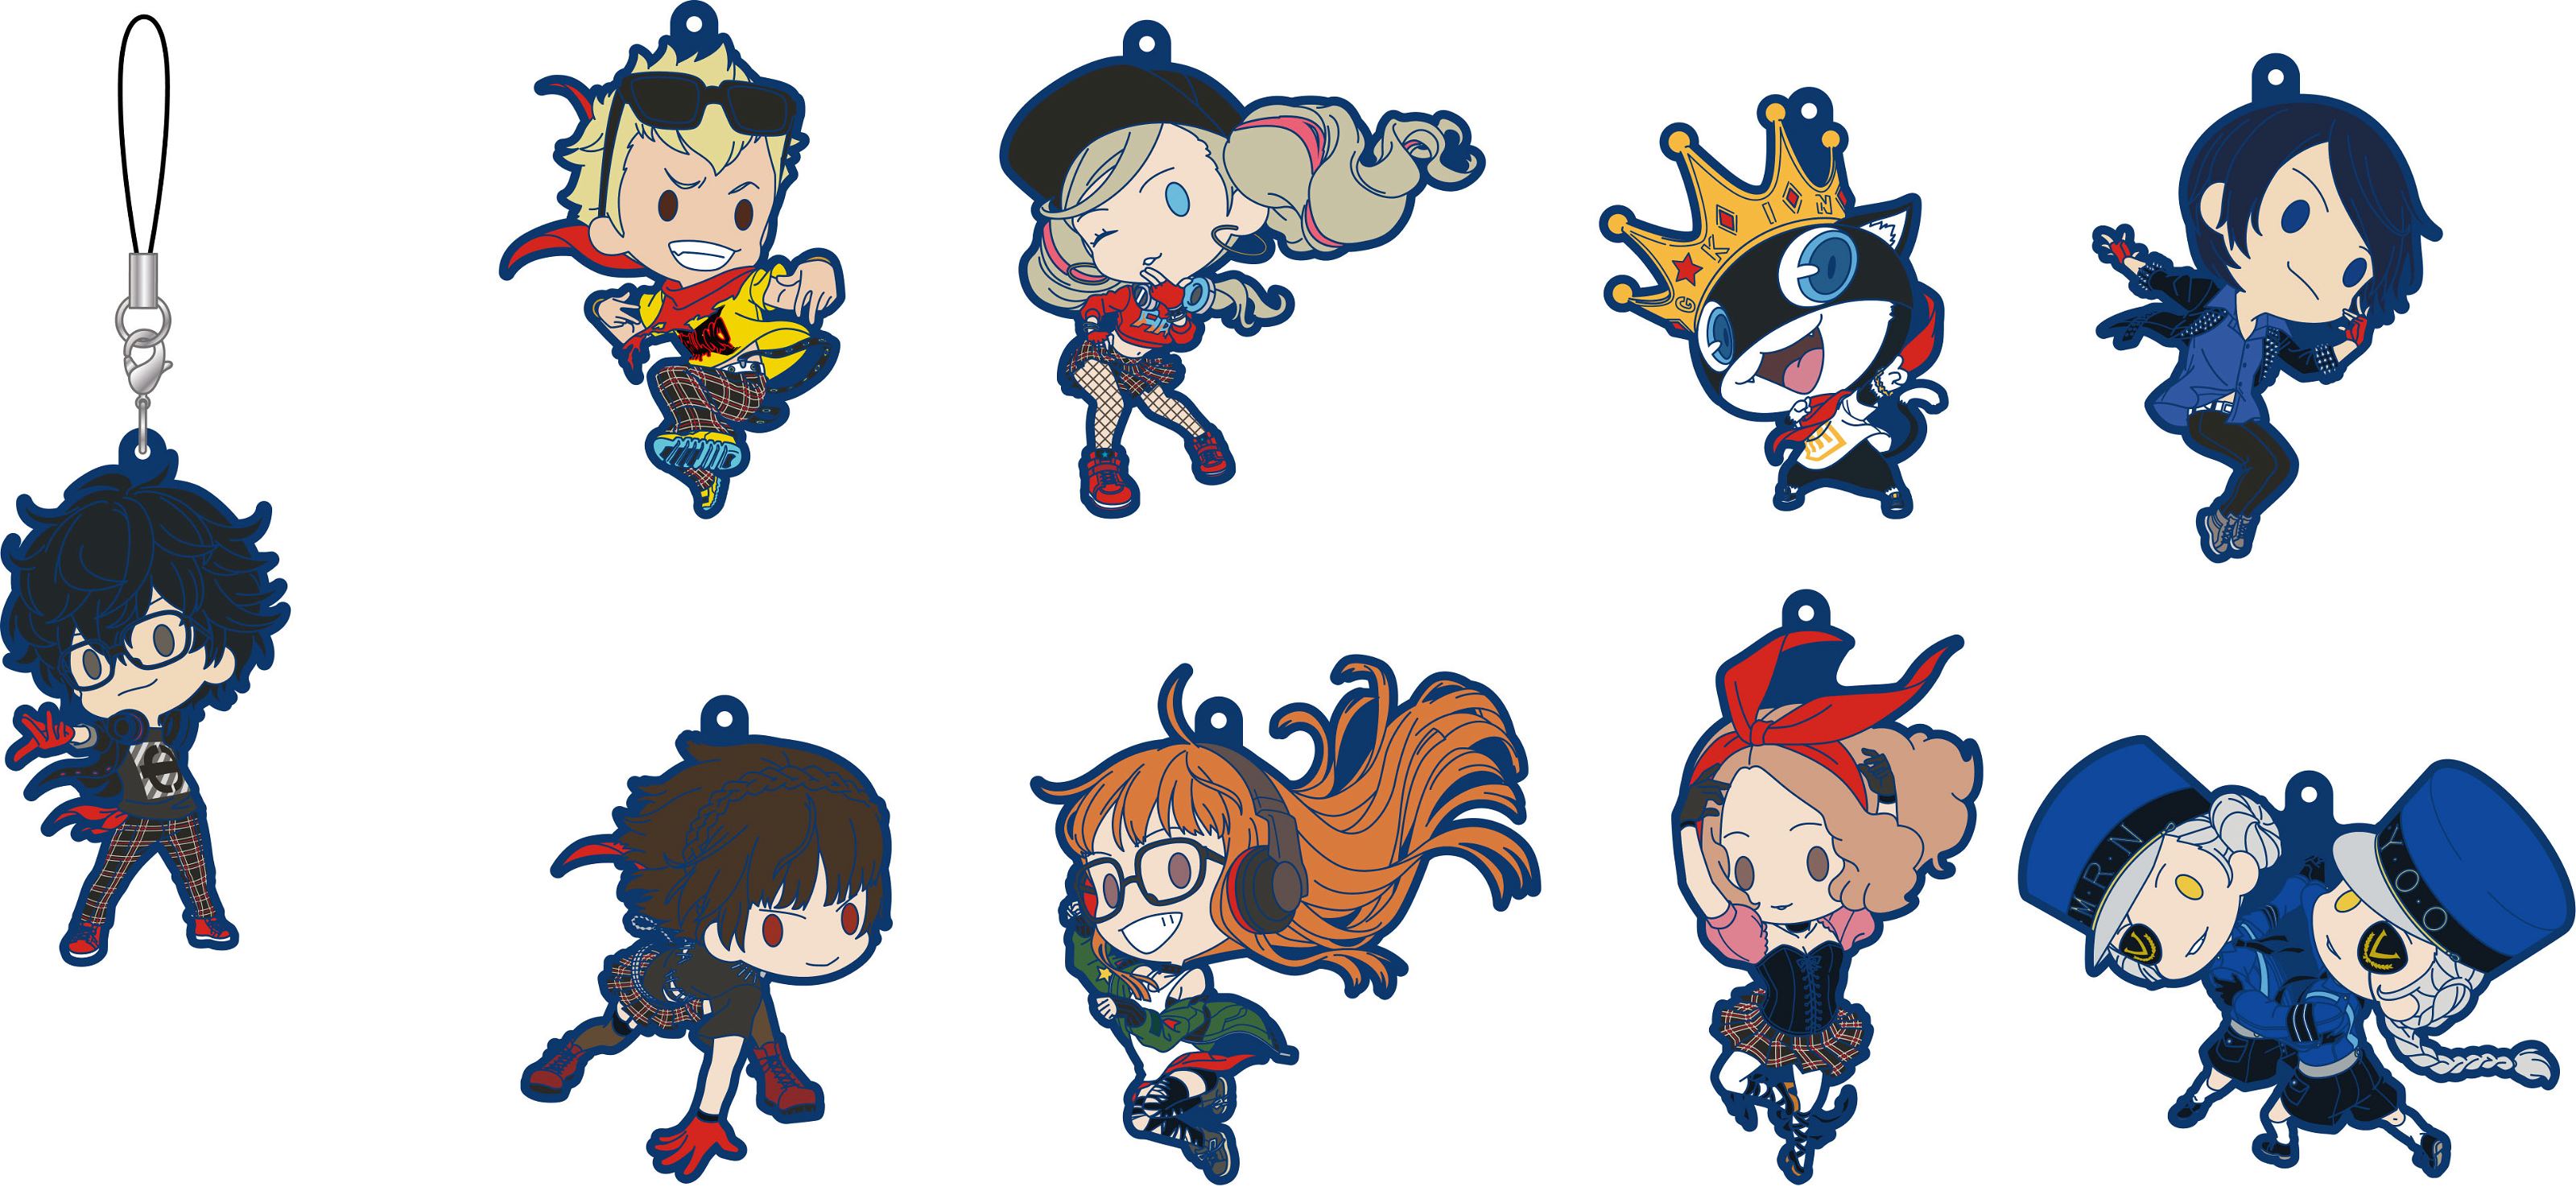 PERSONA 5: DANCING STAR NIGHT RUBBER STRAP COLLECTION (SET OF 9 PIECES) Movic